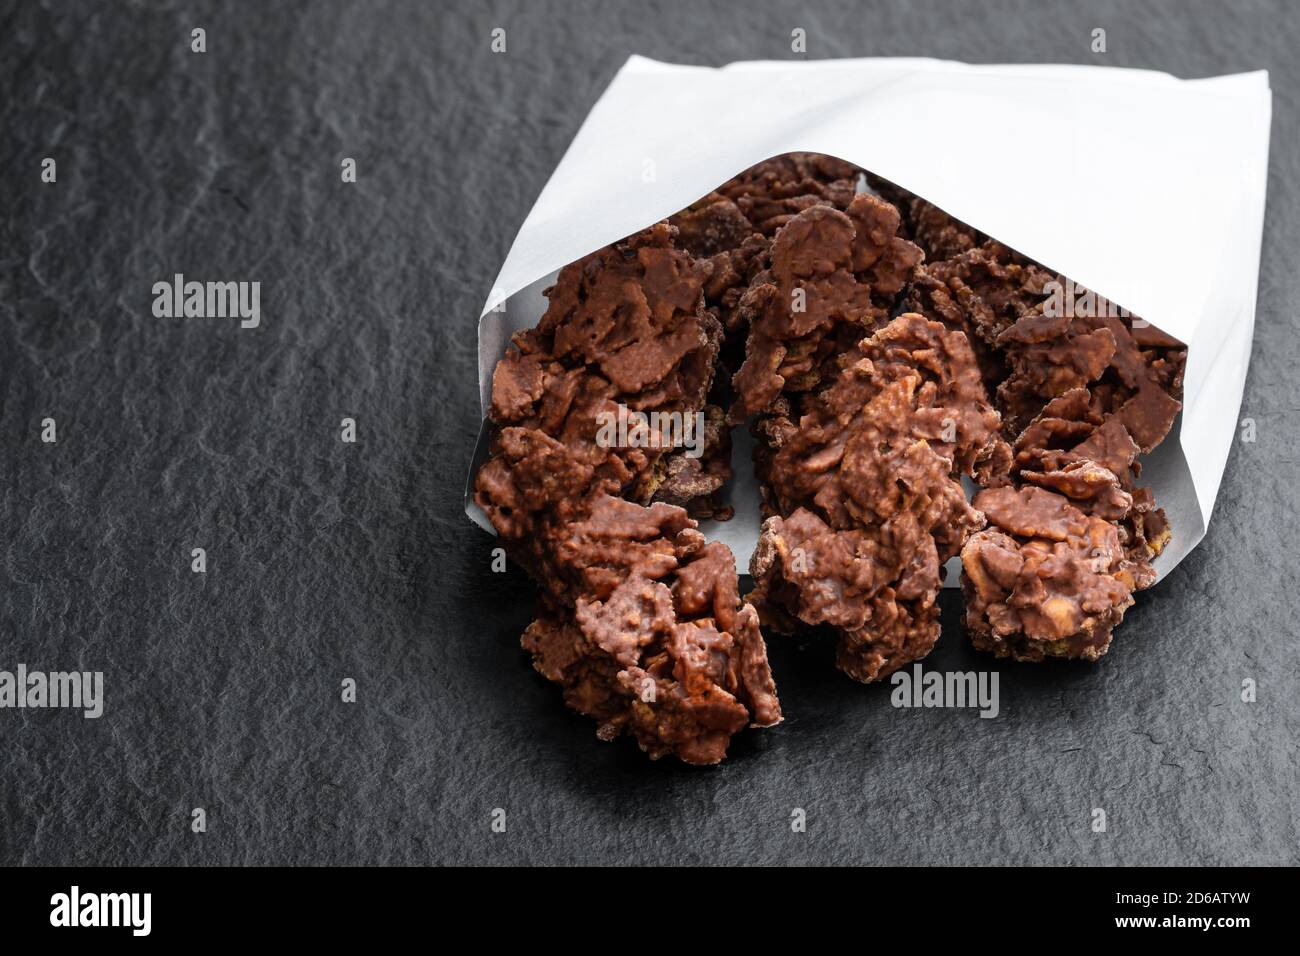 Chocolate  corn flake clusters in paper bag on black stone background Stock Photo